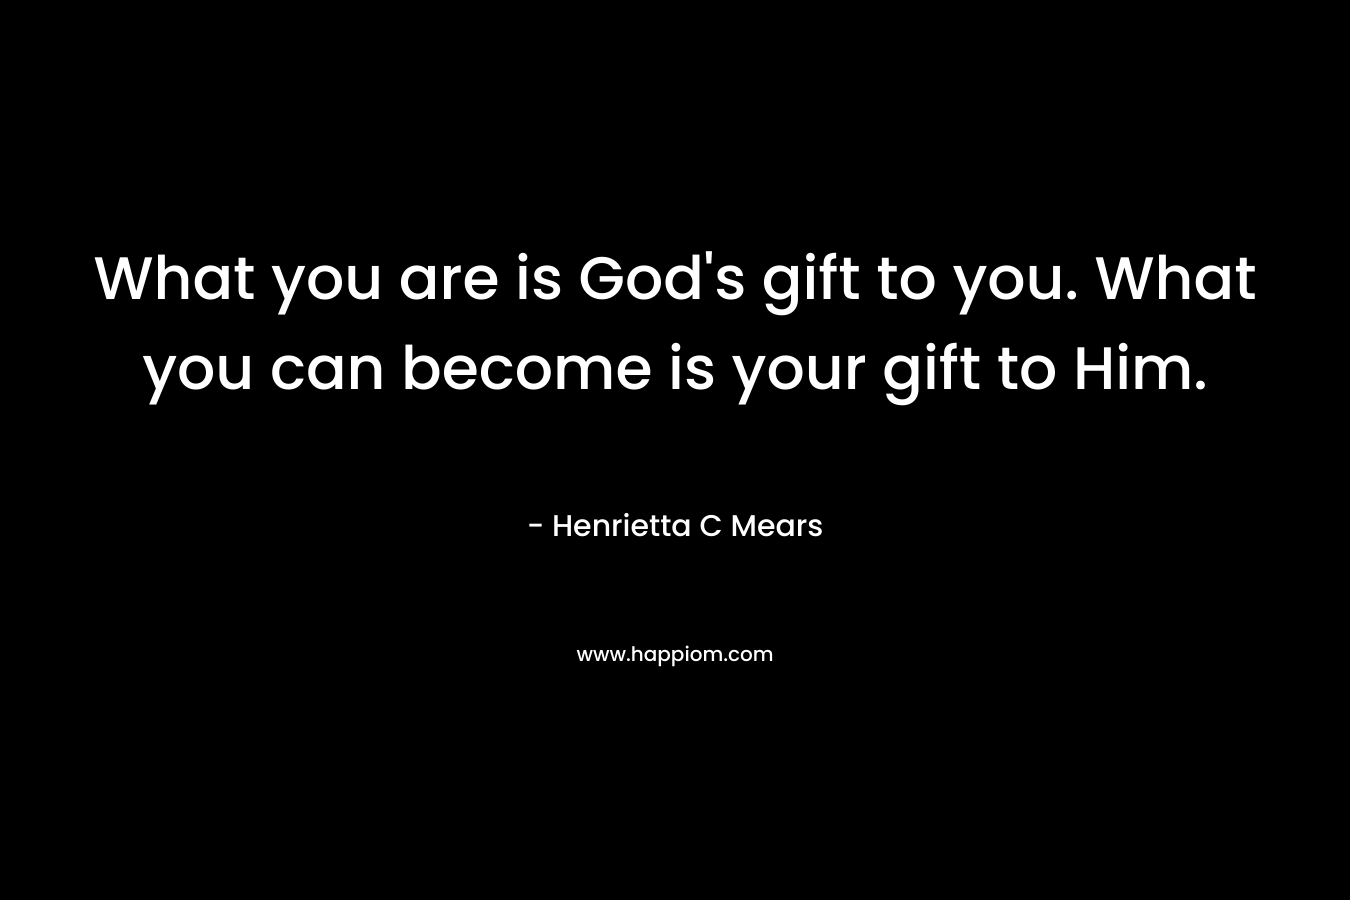 What you are is God’s gift to you. What you can become is your gift to Him. – Henrietta C Mears